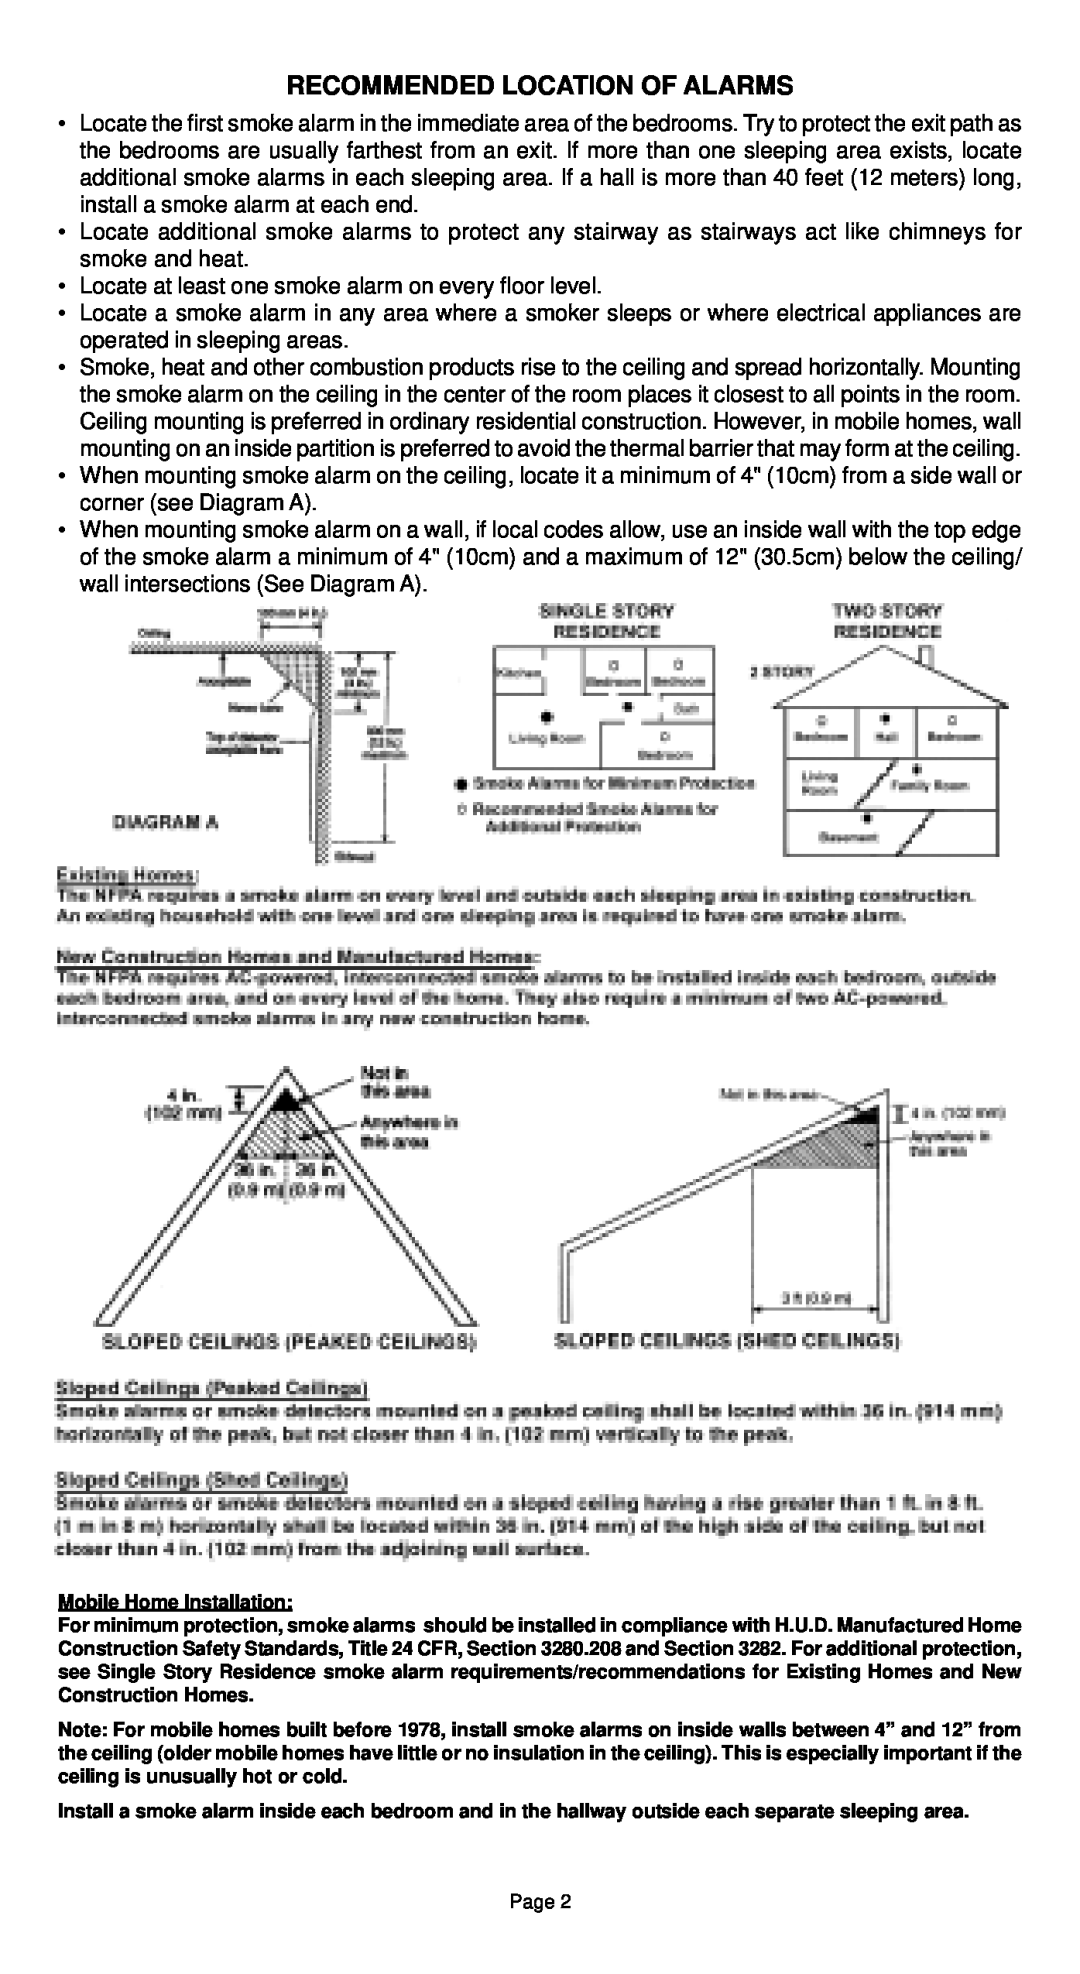 Universal SS-771, SS-770 manual Recommended Location Of Alarms 